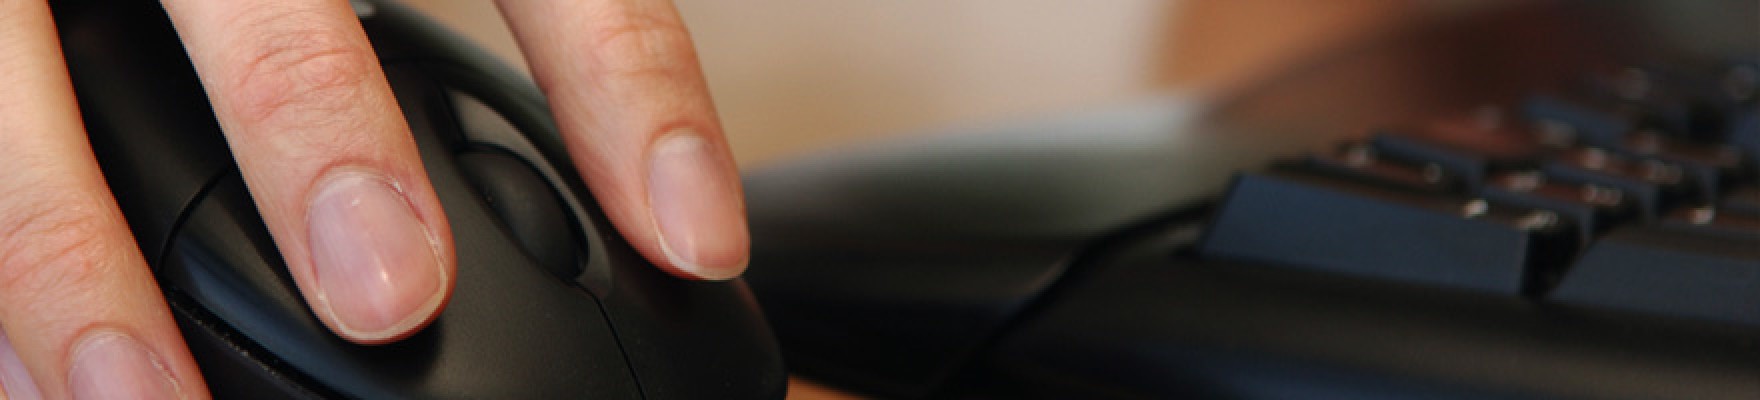 closeup of hand on a computer mouse and keyboard